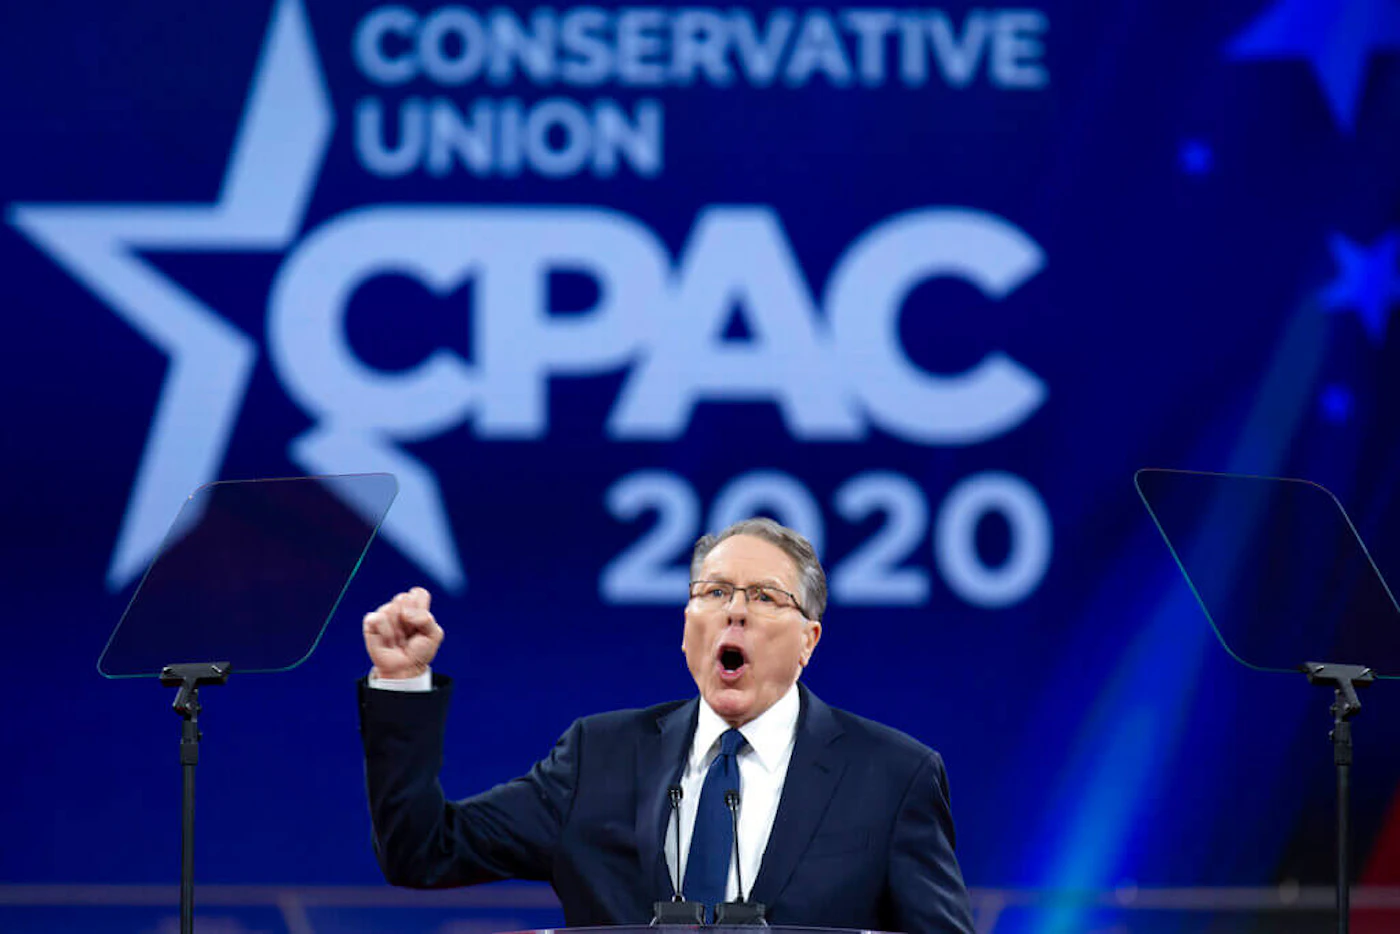 National Rifle Association Executive Vice President and CEO Wayne LaPierre speaks at Conservative Political Action Conference. (AP Photo/Jose Luis Magana)